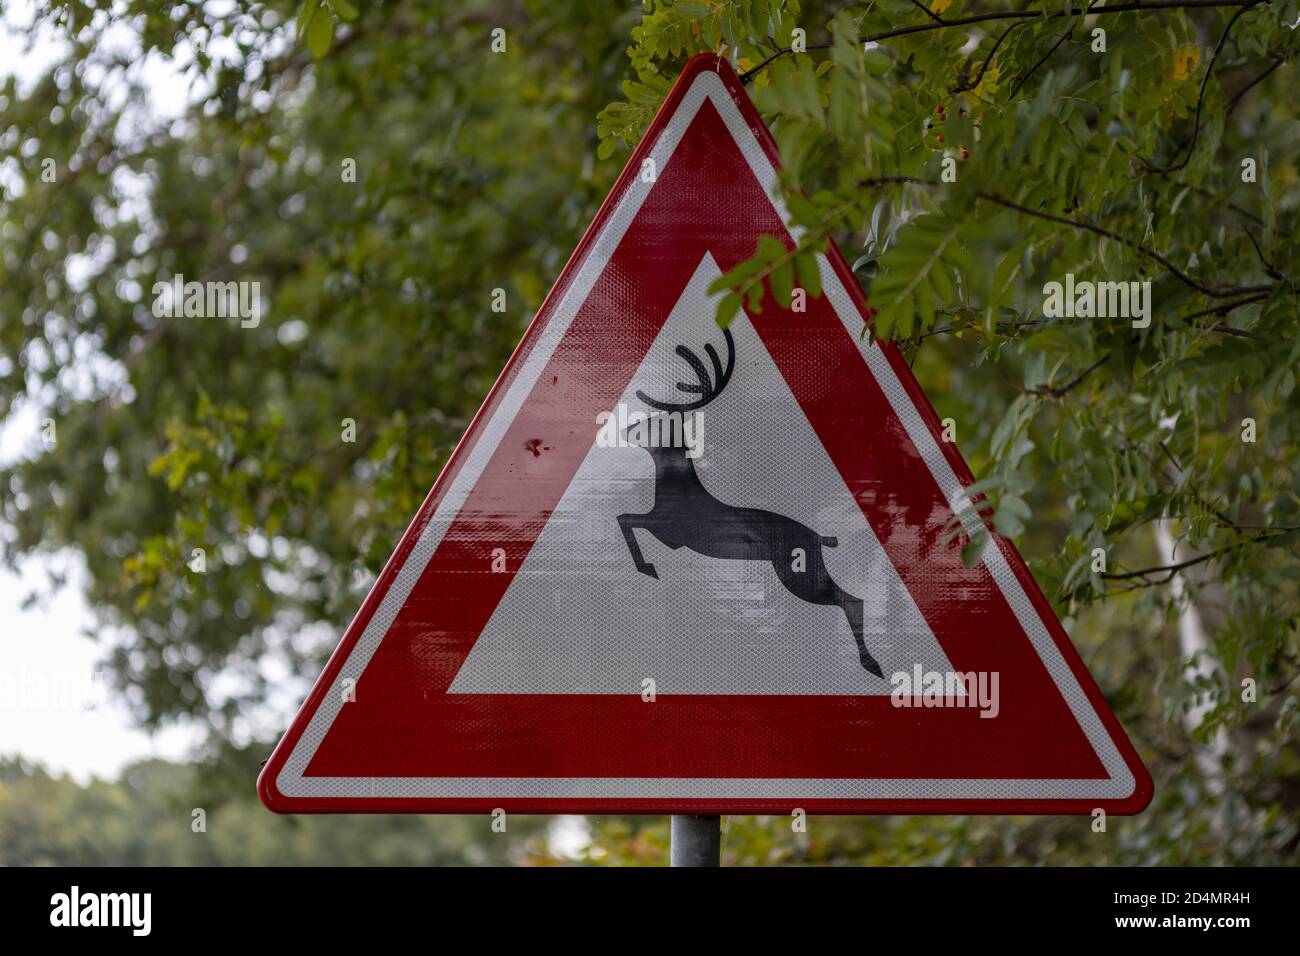 HOGE HEXEL, NETHERLANDS - Oct 02, 2020: Reflecting Dutch traffic sign on the side of the road with a deer and red triangle warning for wildlife to cro Stock Photo